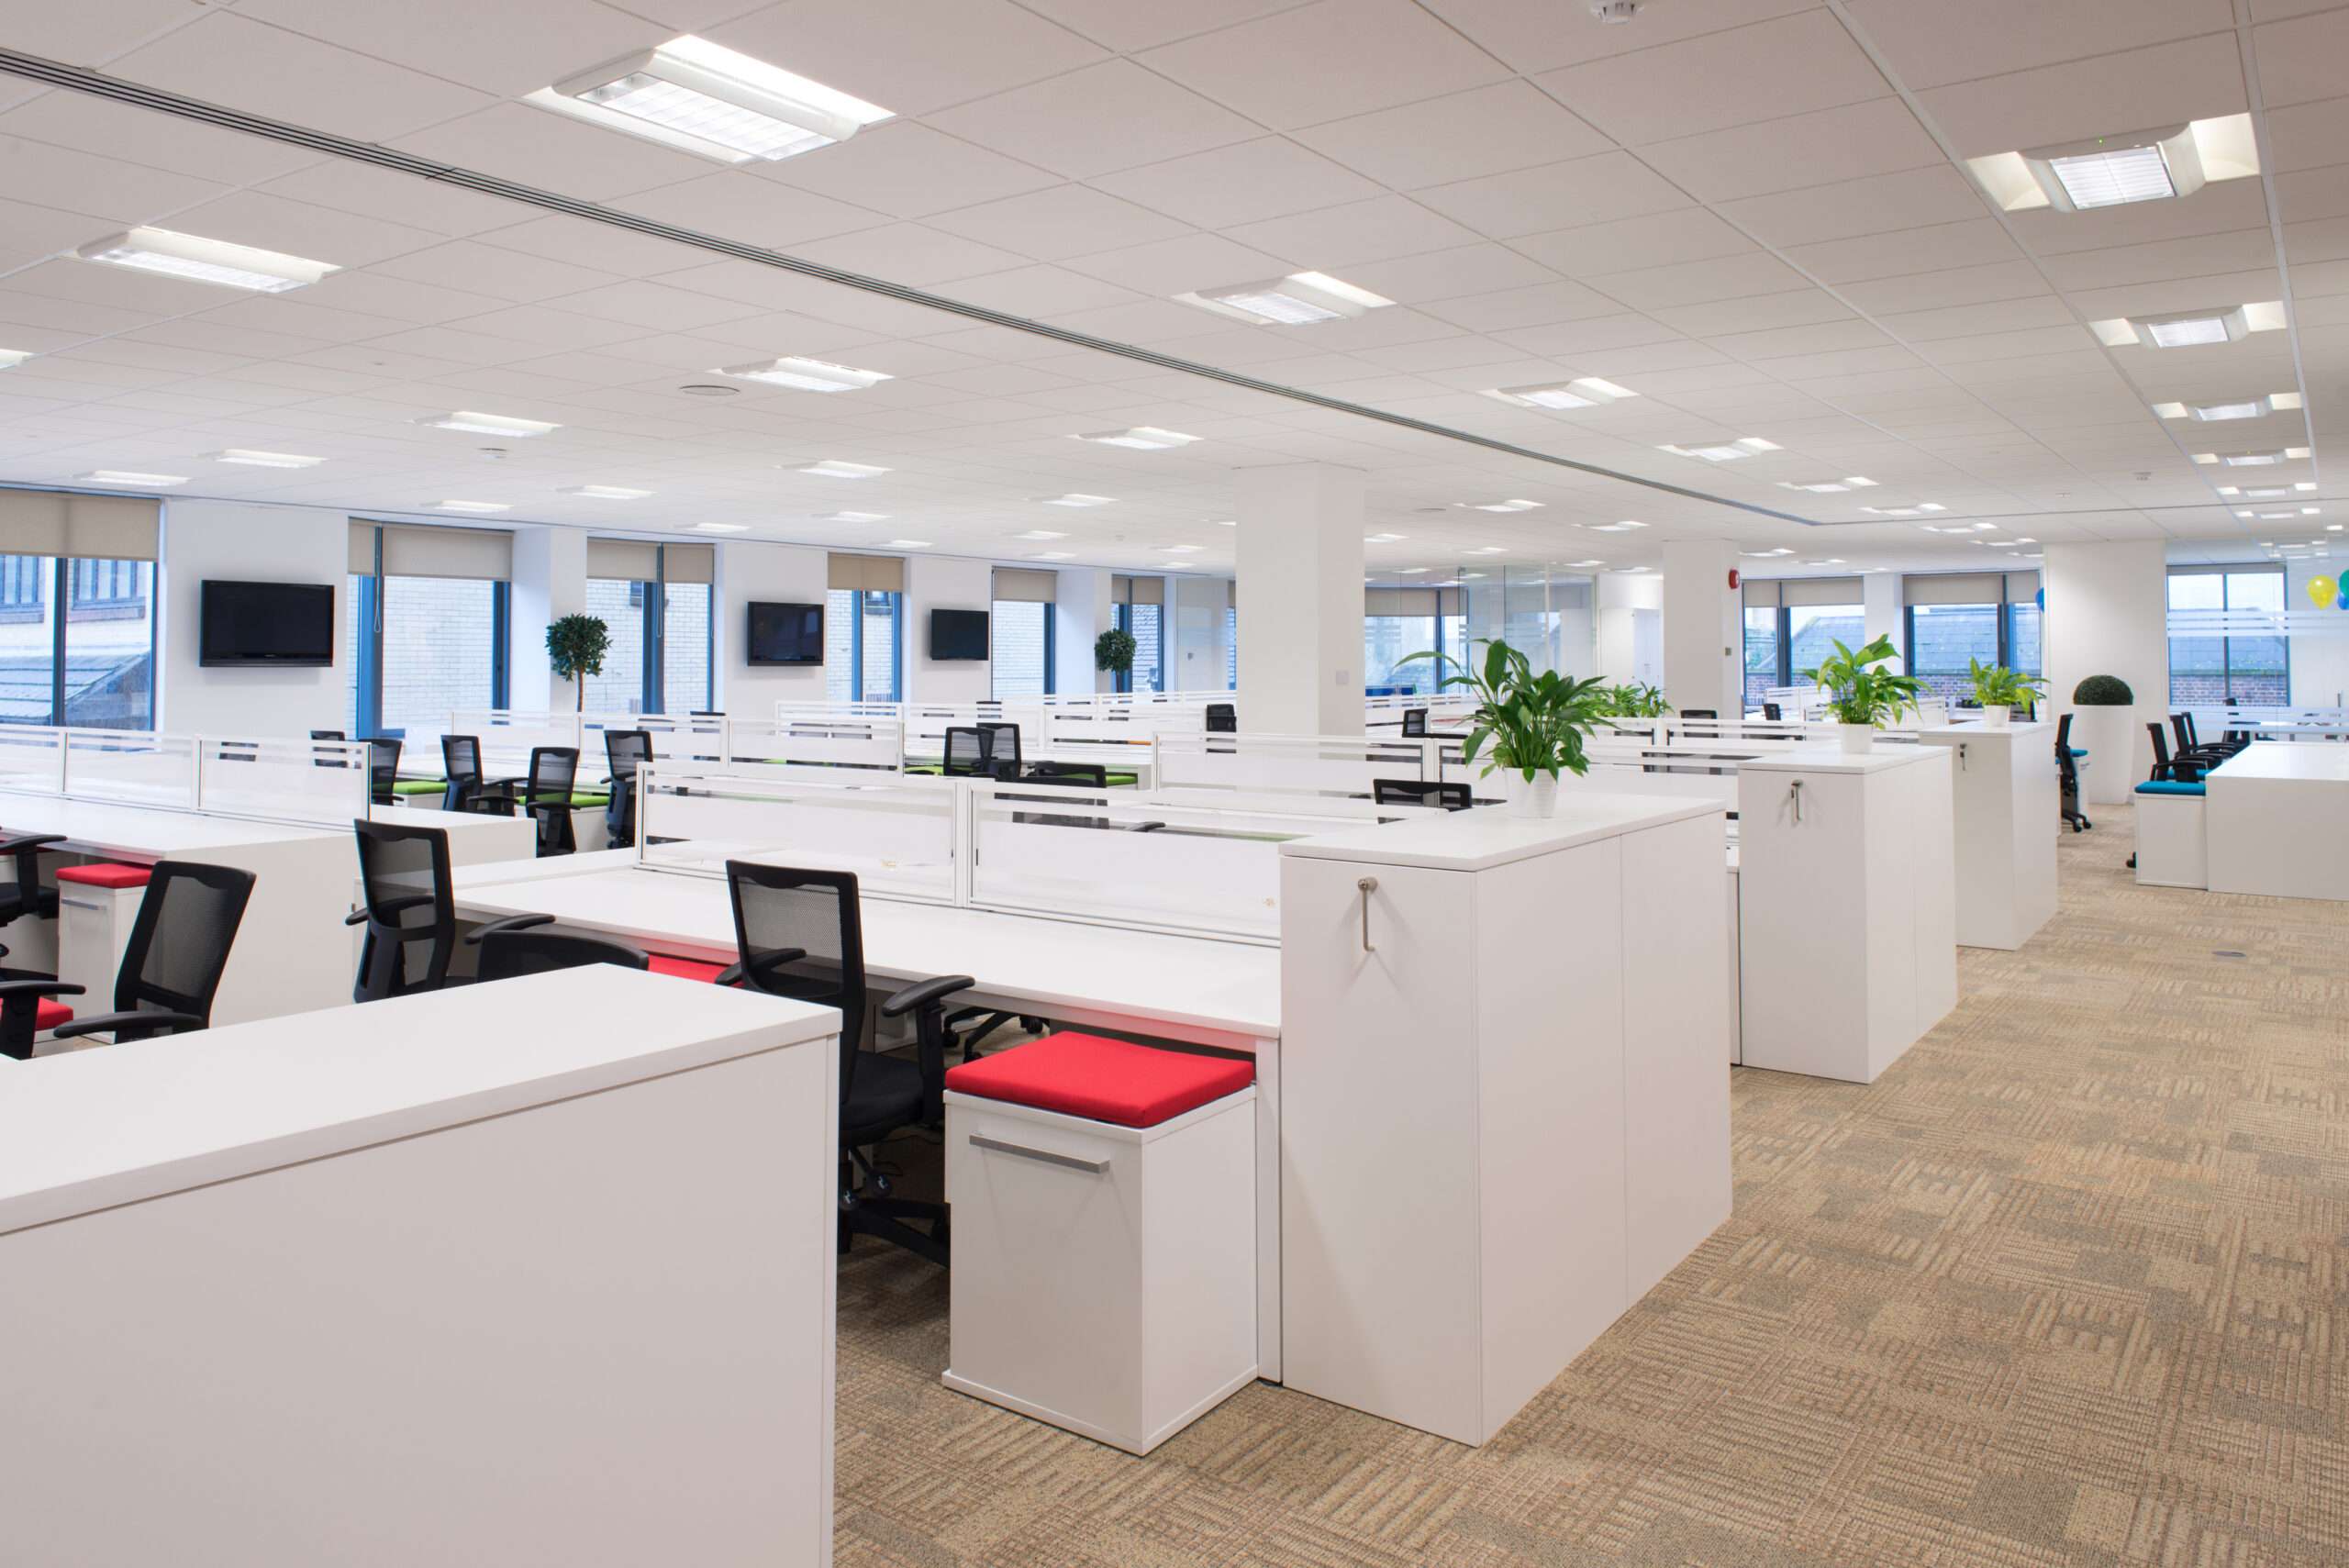 The Federal Government Spent $3.3 Billion on Office Furniture as Remote Work Increased